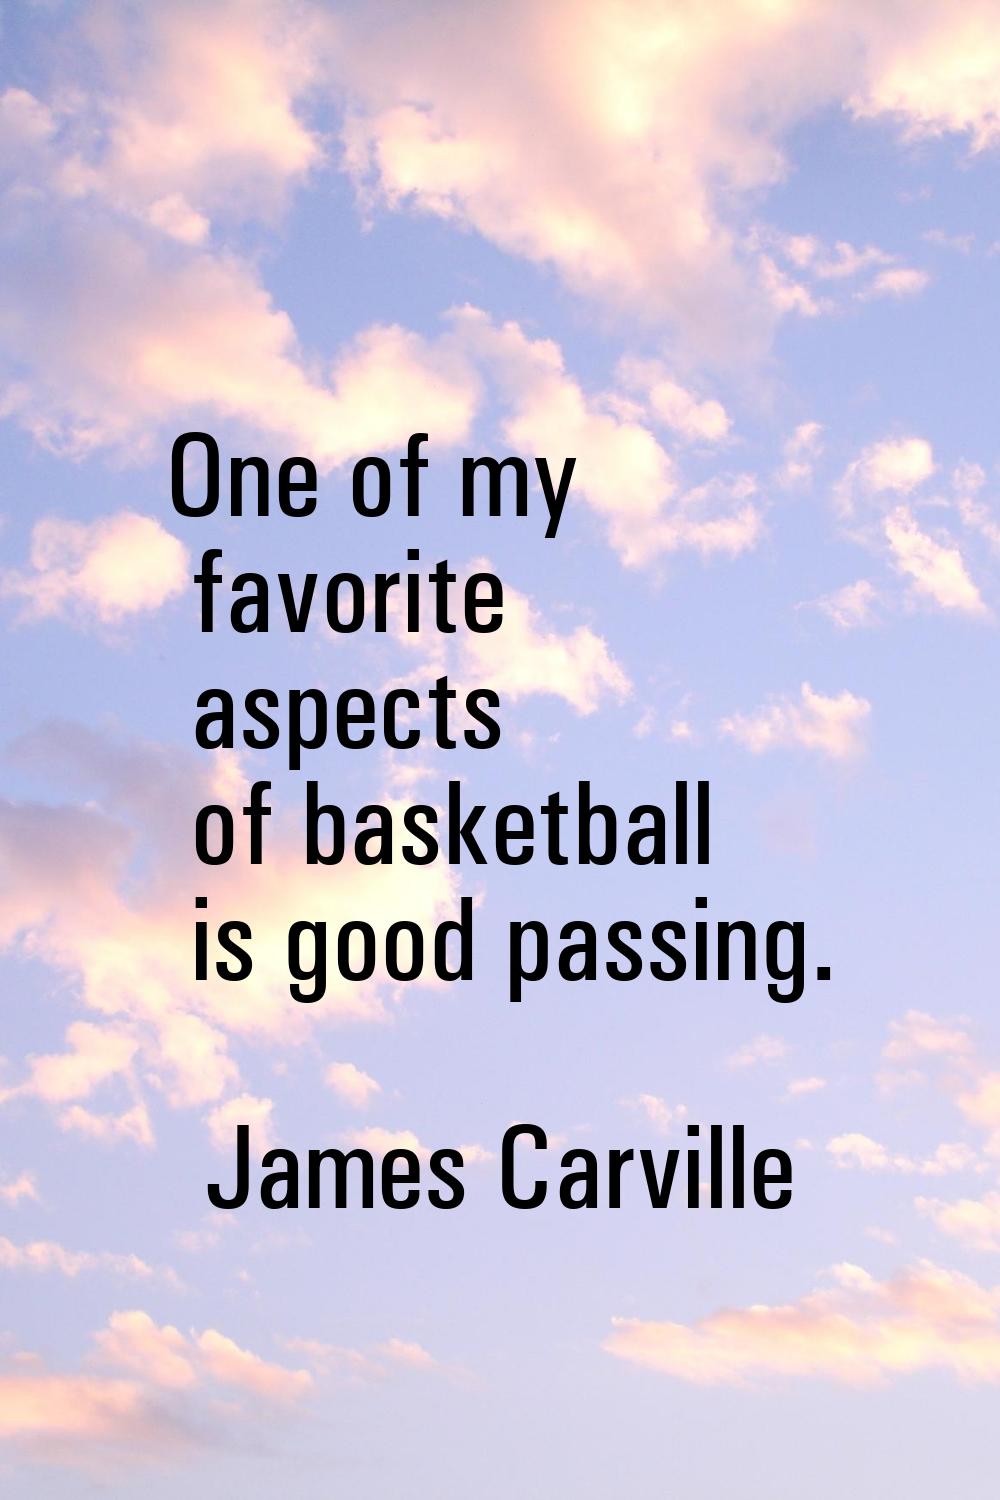 One of my favorite aspects of basketball is good passing.